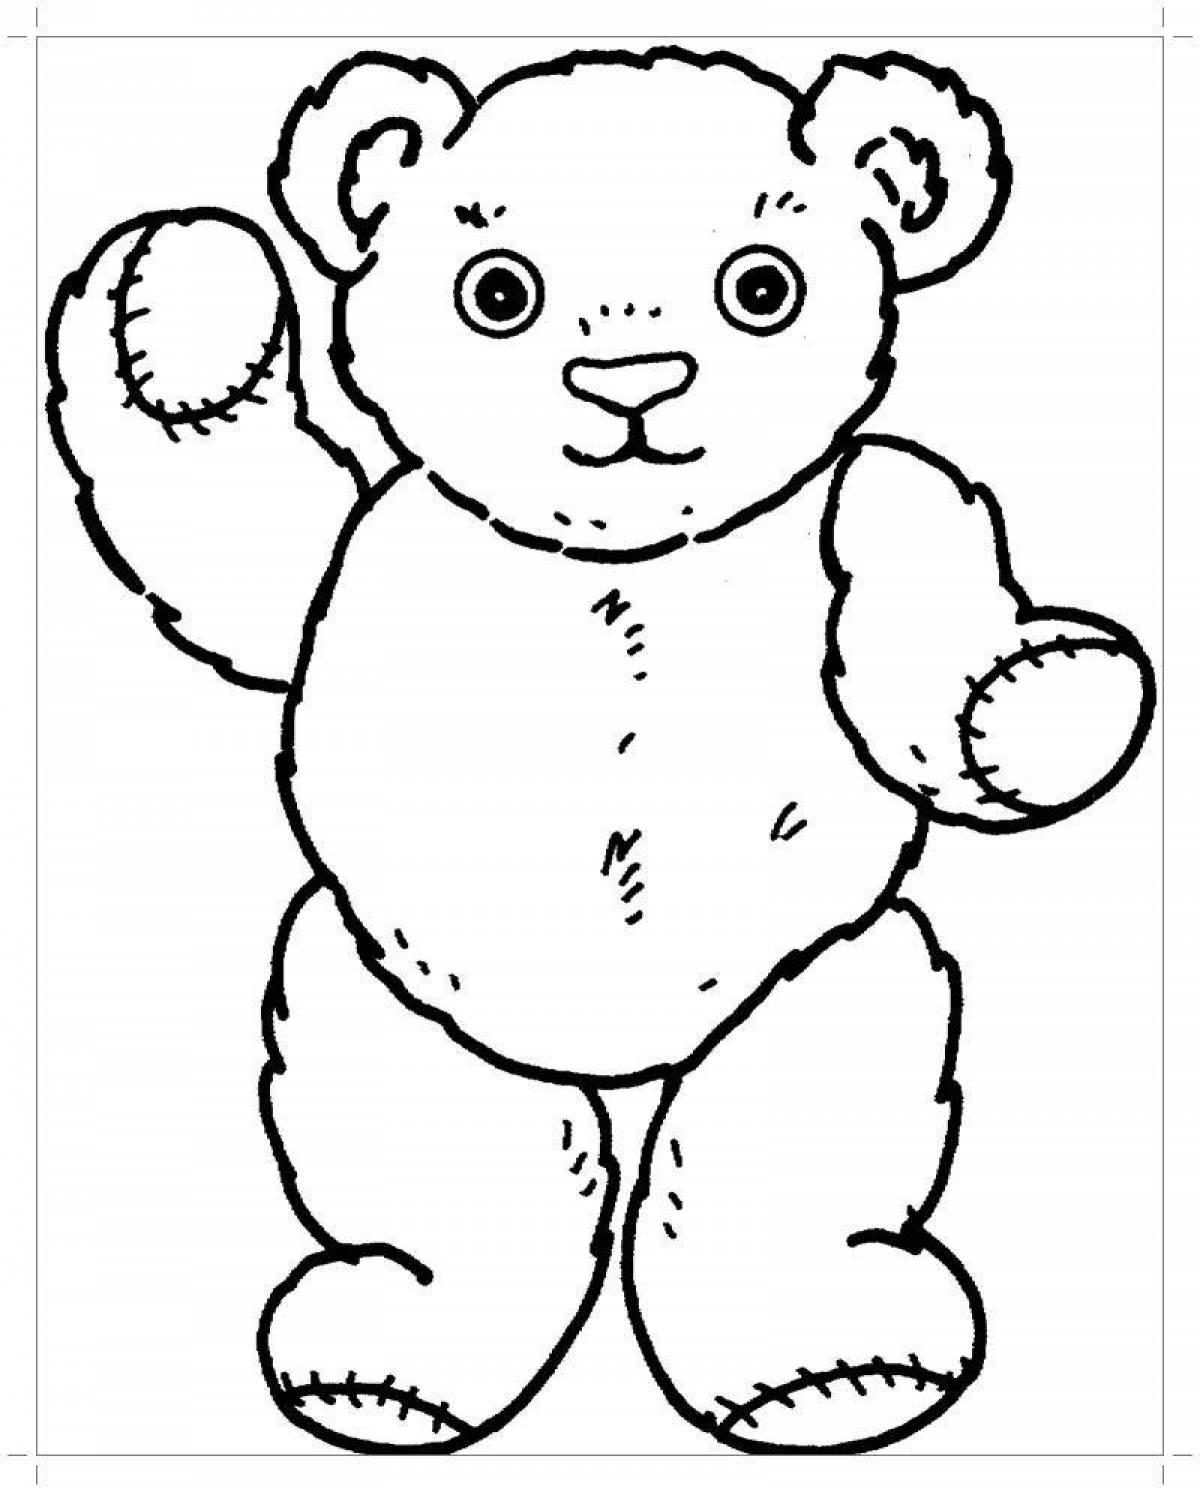 Naughty teddy bear coloring book for kids